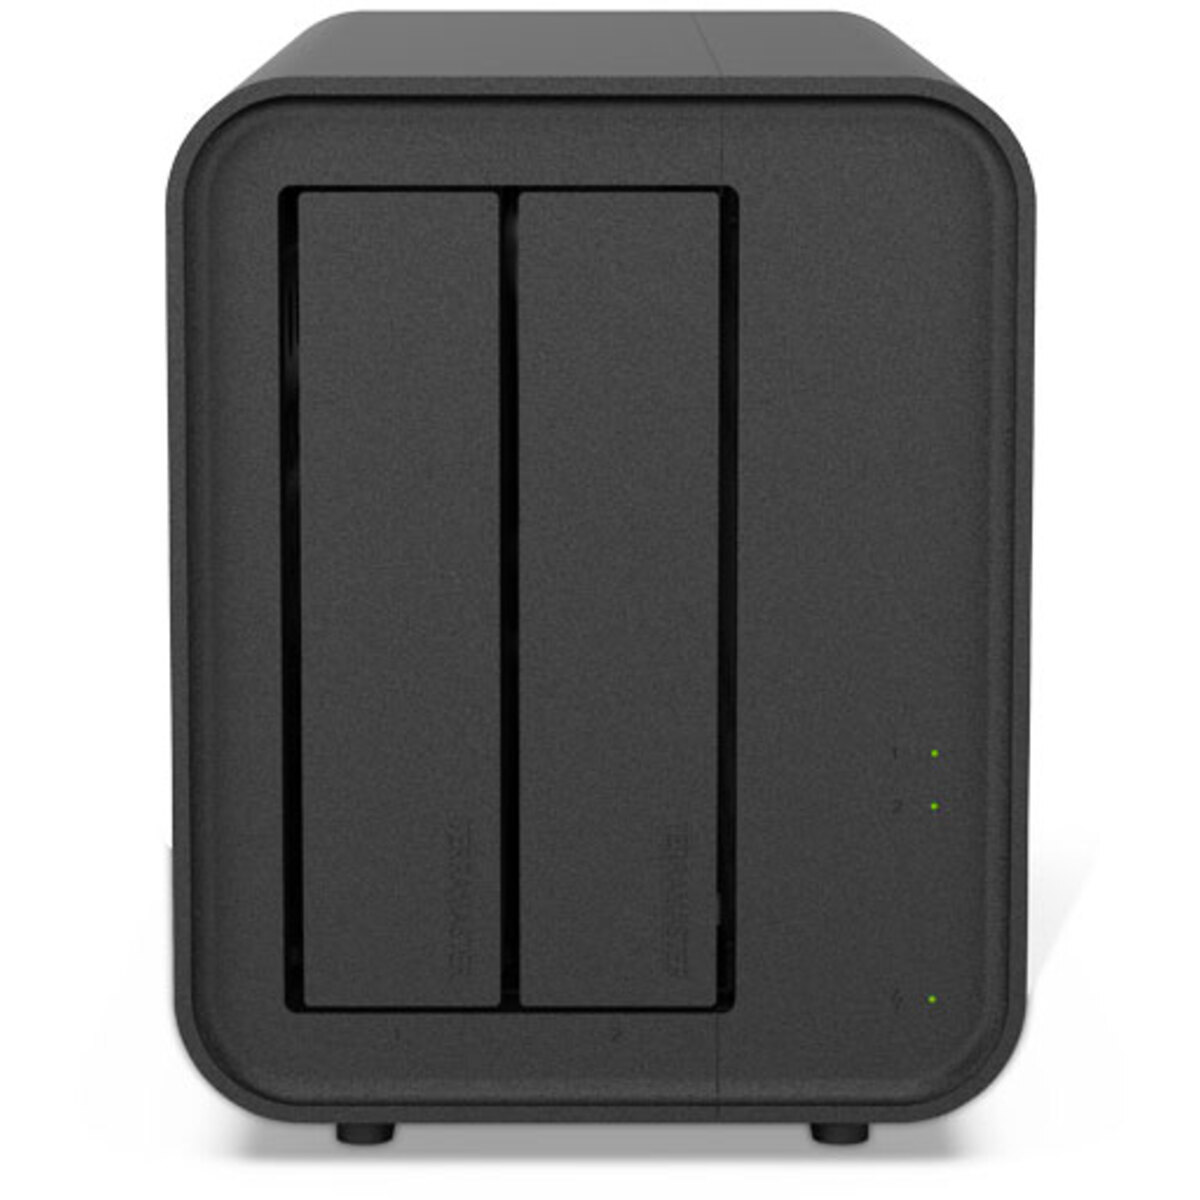 TerraMaster D5 Hybrid 500gb 2-Bay Desktop Multimedia / Power User / Business DAS - Direct Attached Storage Device 1x500gb Samsung 870 EVO MZ-77E500BAM 2.5 560/530MB/s SATA 6Gb/s SSD CONSUMER Class Drives Installed - Burn-In Tested D5 Hybrid